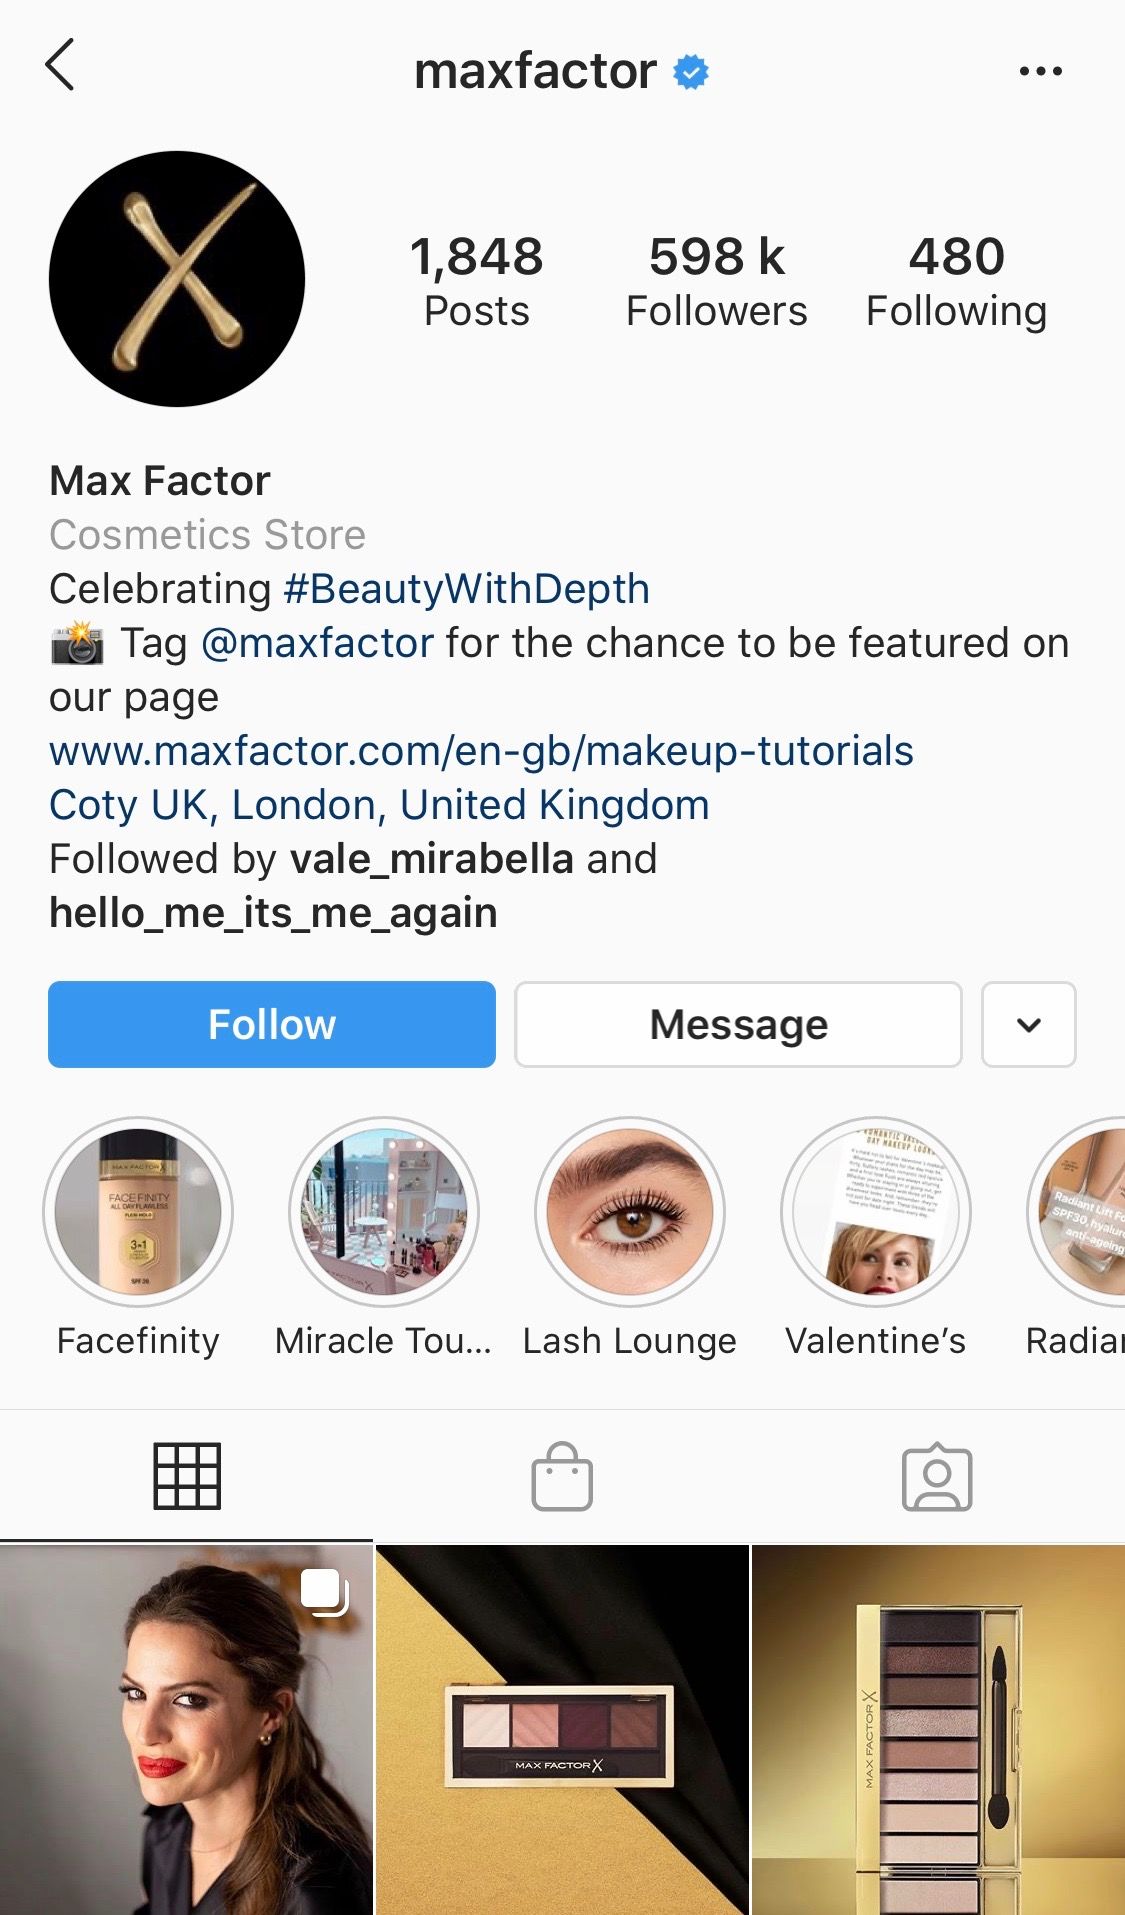 @maxfactor share their hashtag #BeautyWithDepth on their Instagram bio